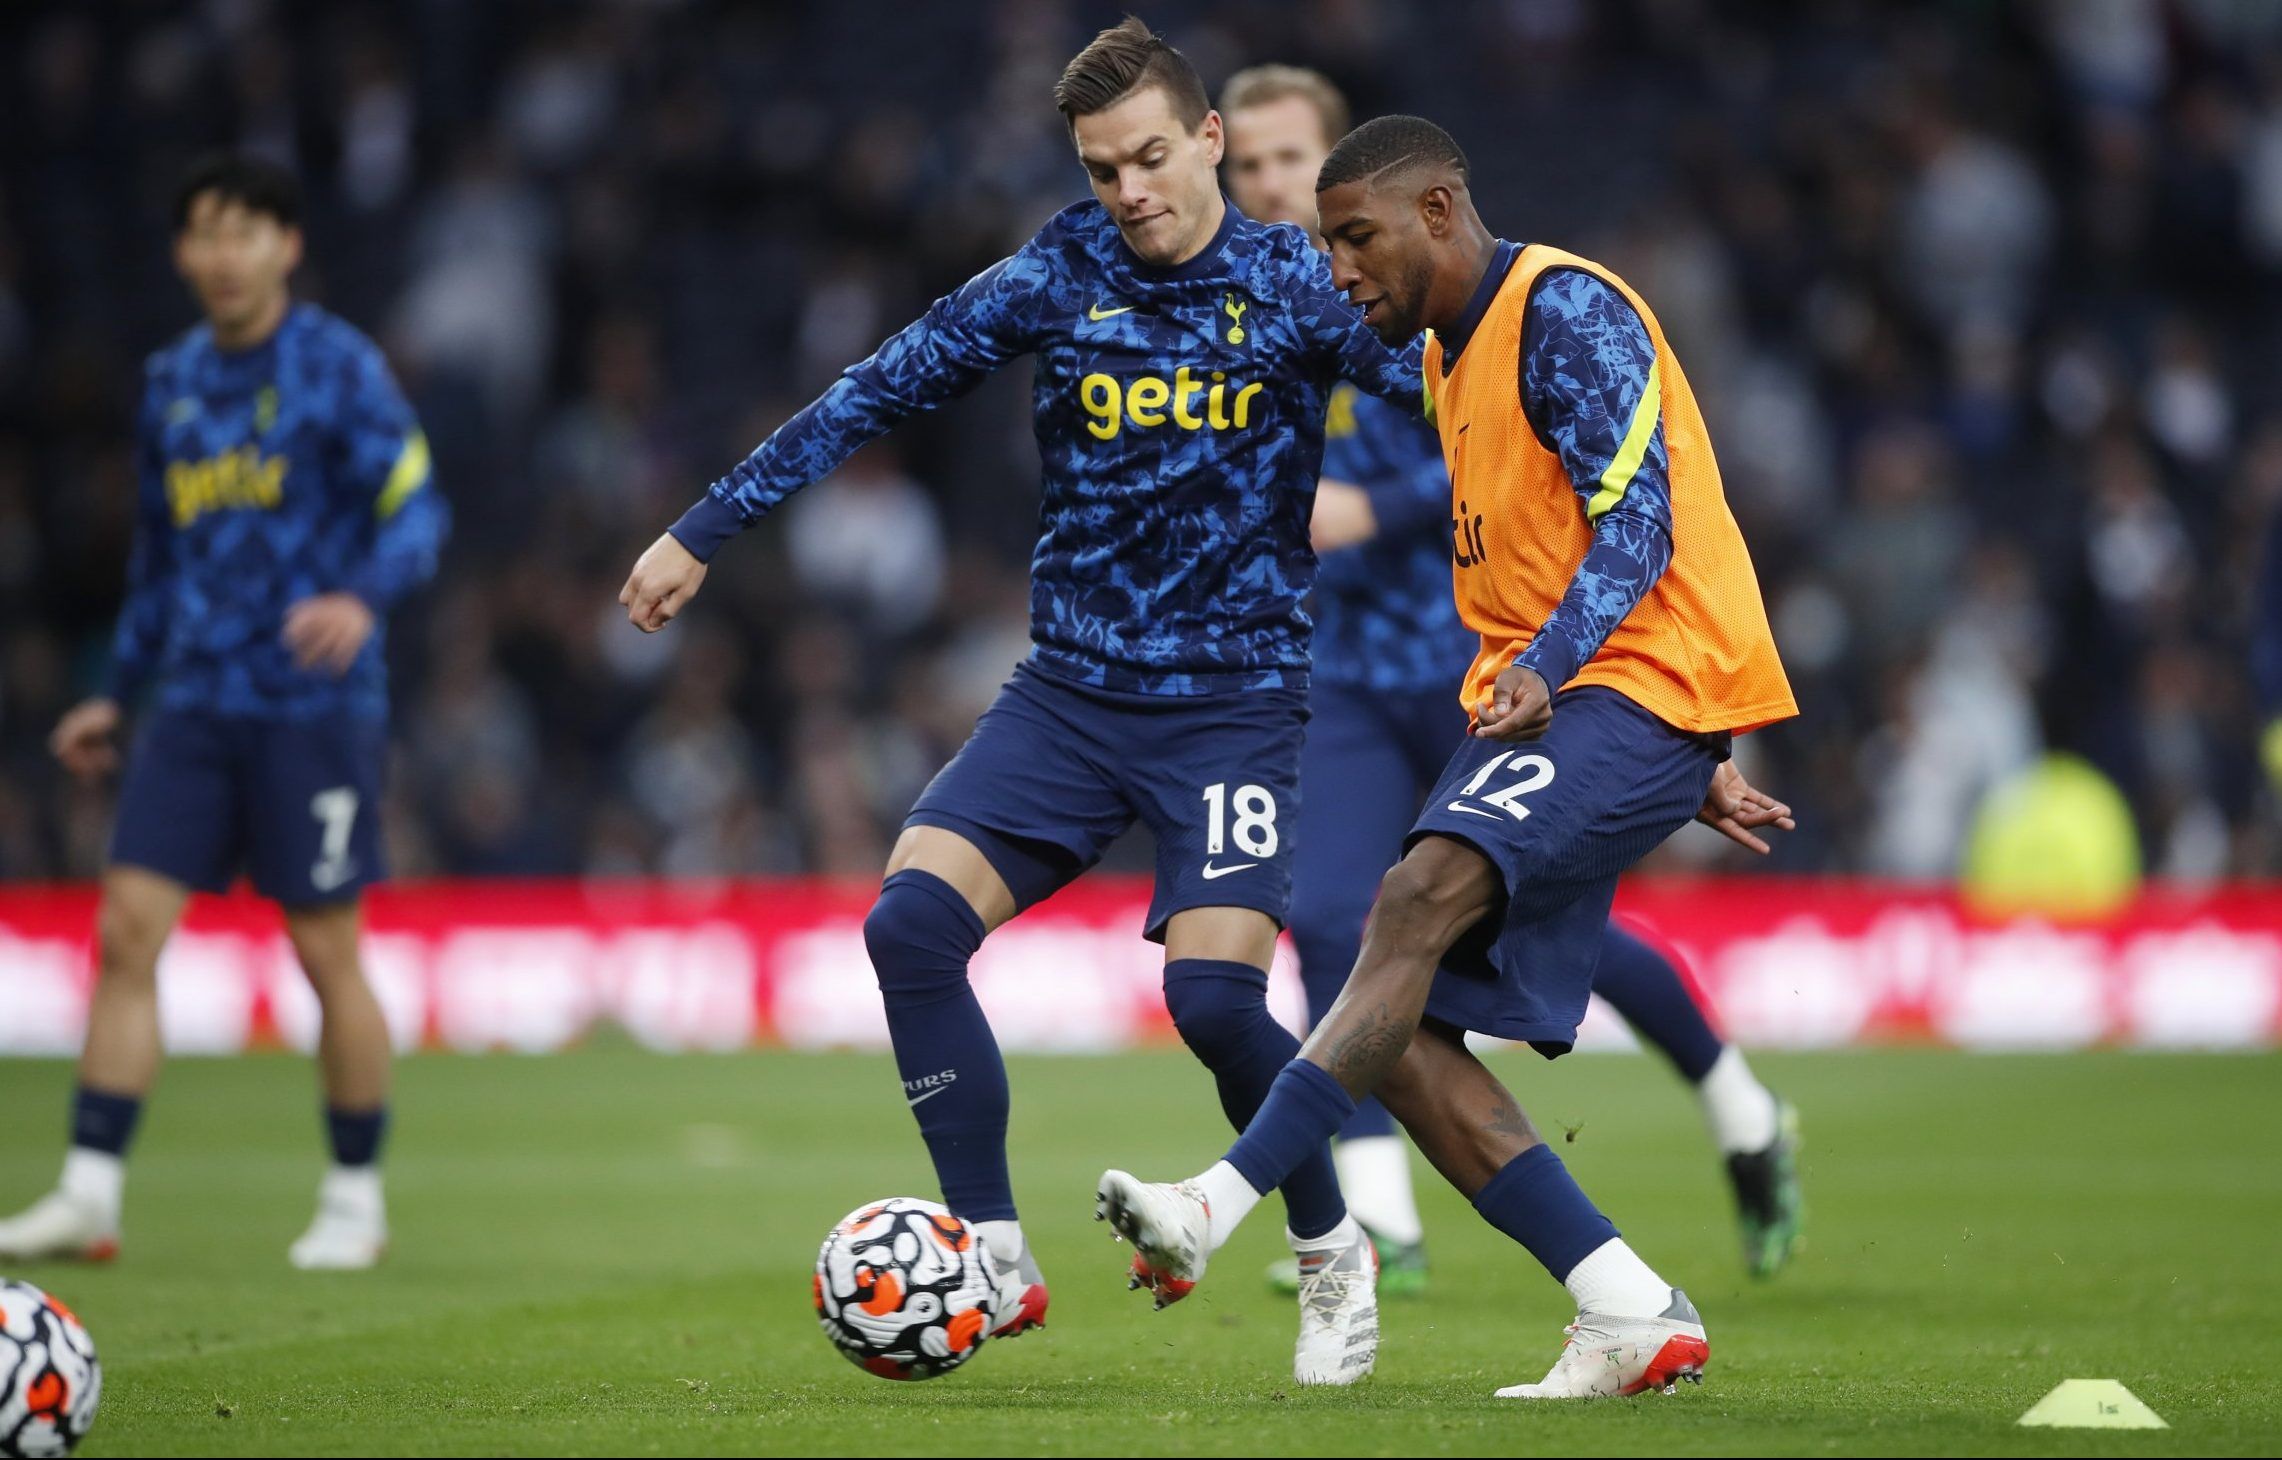 Tottenham Hotspur's Emerson and Giovani Lo Celso during warm up before Premier League clash with Manchester United